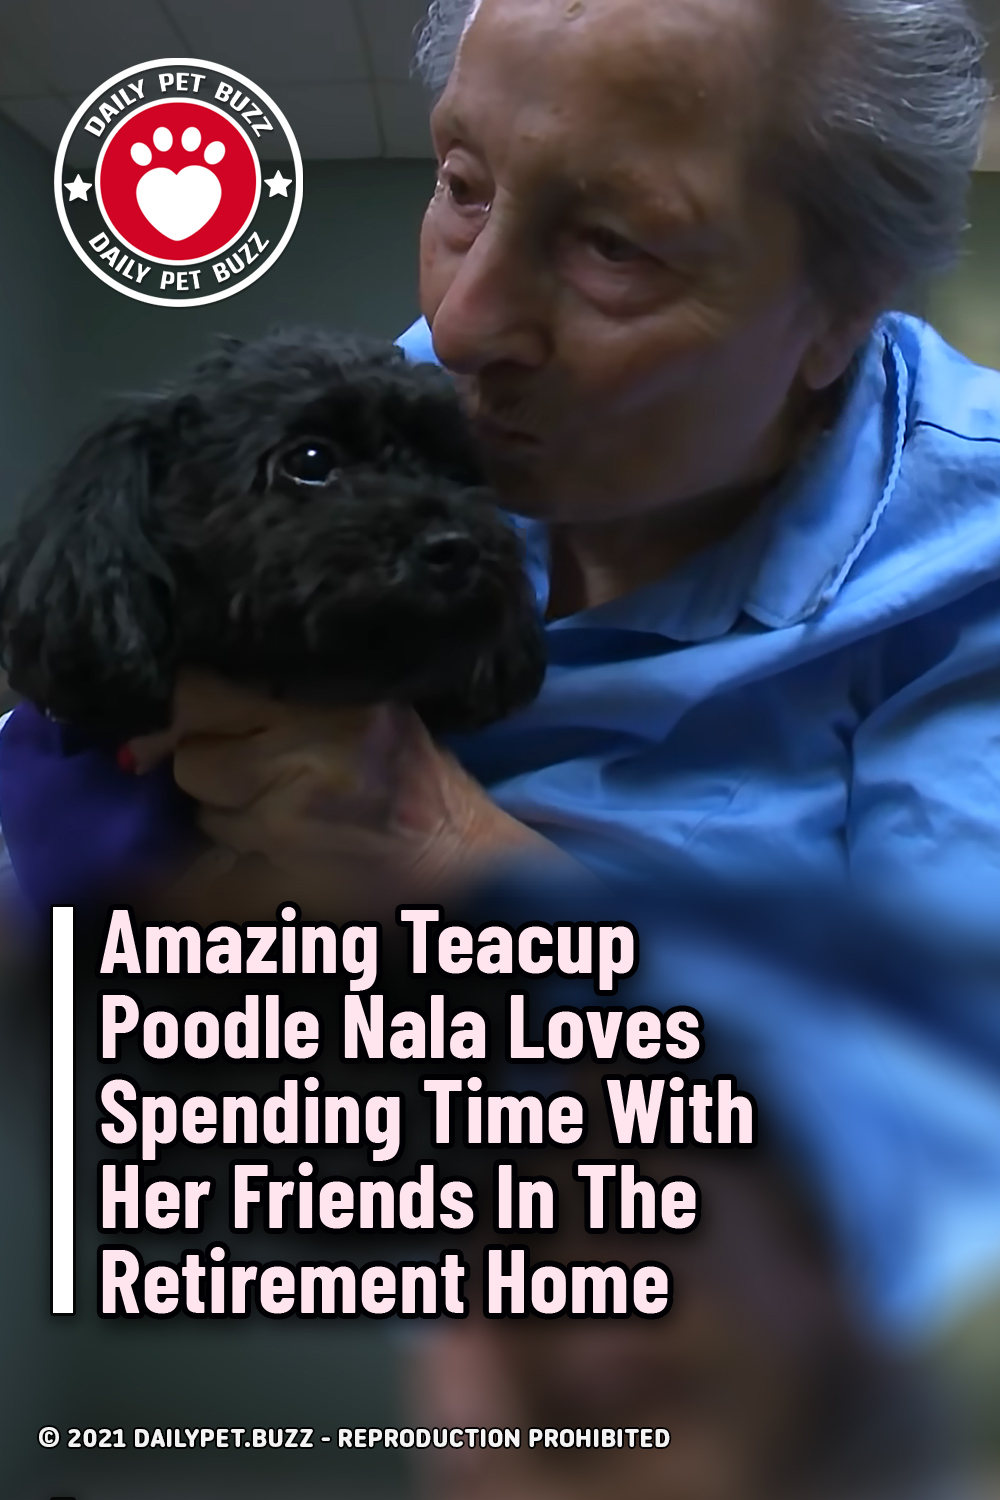 Amazing Teacup Poodle Nala Loves Spending Time With Her Friends In The Retirement Home